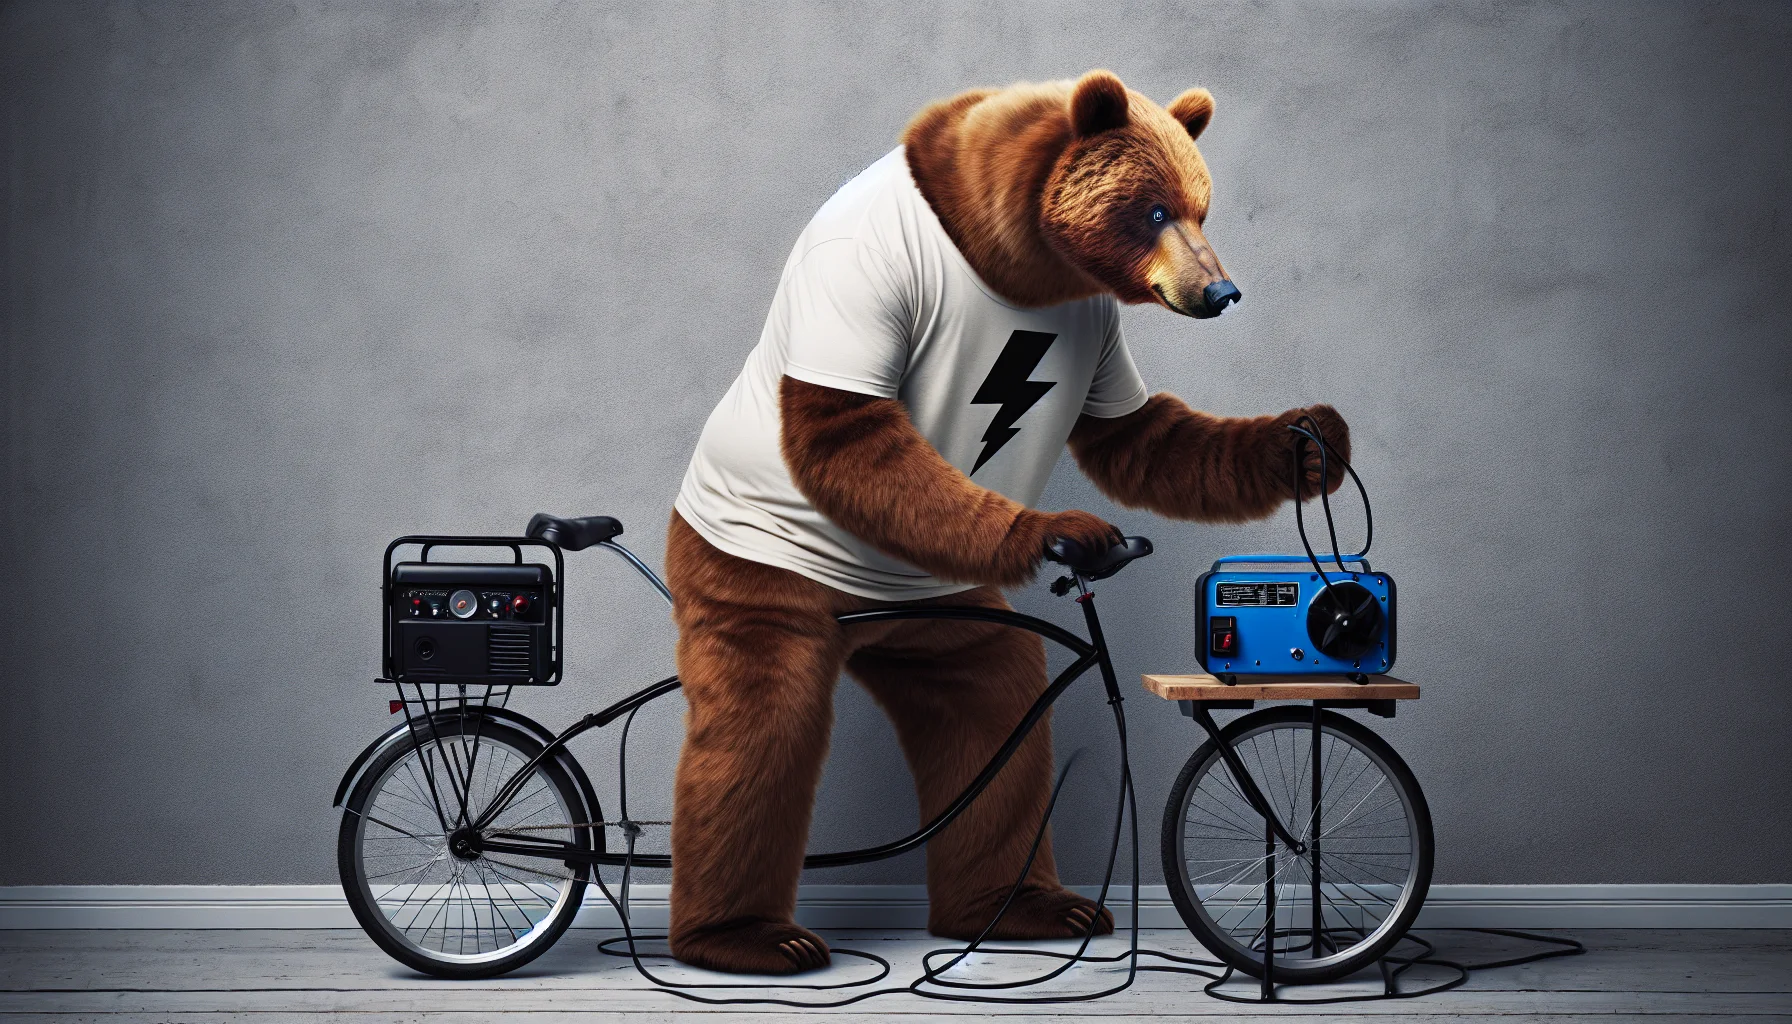 Create a realistic scene featuring an anonymous individual humorously dressed as a bear (modeled on the size and appearance of the Kodiak bear) with a lightning bolt symbol on his shirt. This individual is fiddling with a bicycle-powered generator. The caption etched at the bottom of the image says 'Bears Powering the Future', humorously drawing a connection between the bear costume and the act of generating electricity.